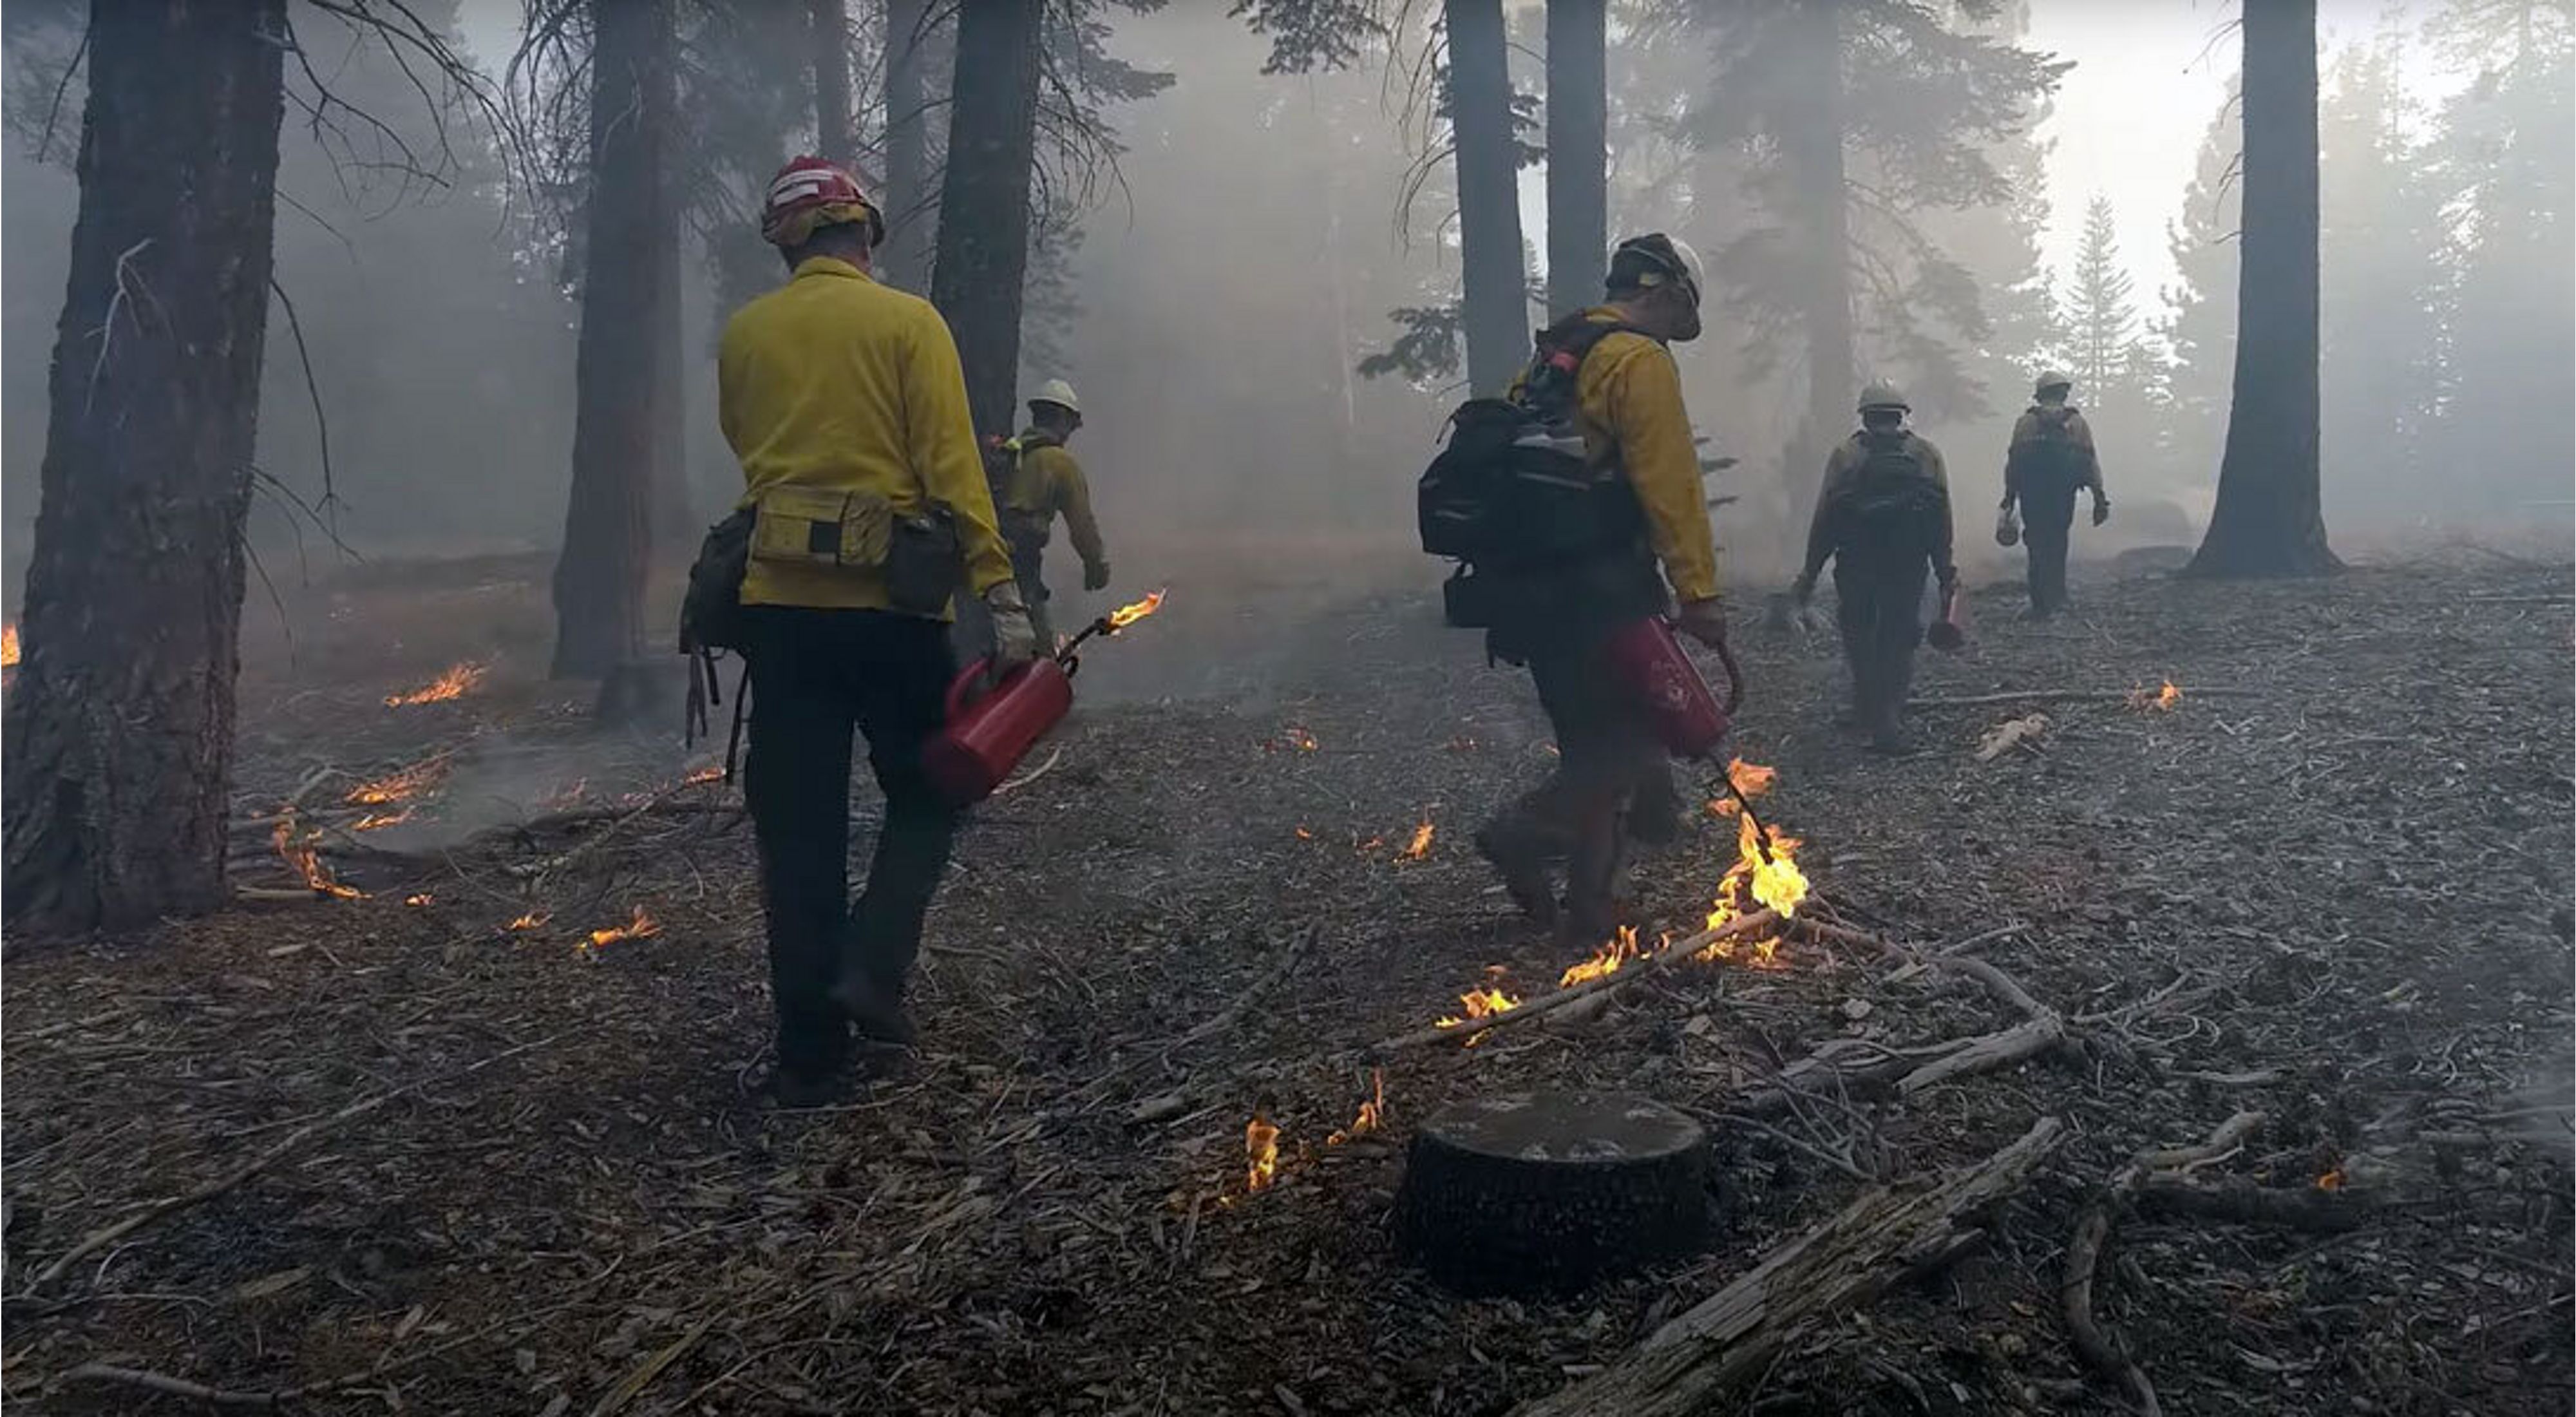 Trained prescribed burn practitioners lighting small fires on a forest floor.